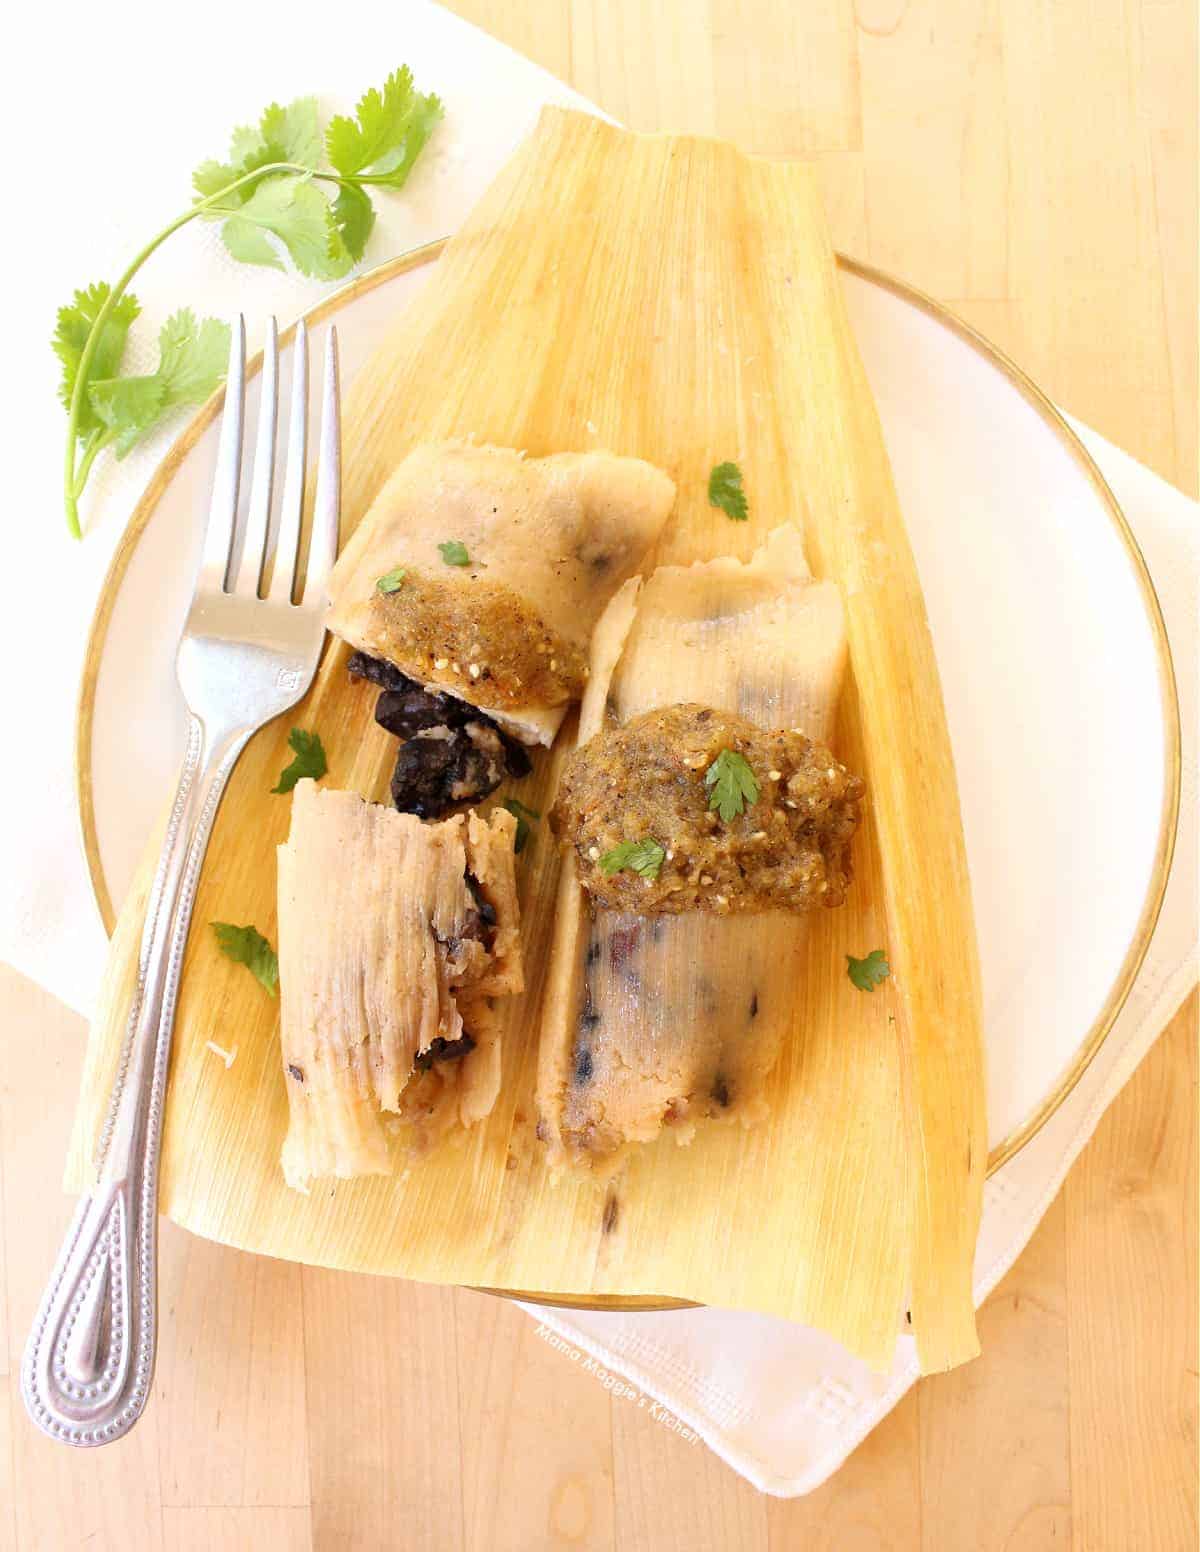 Two tamales on a corn husk topped with salsa, cilantro, and served with a fork.